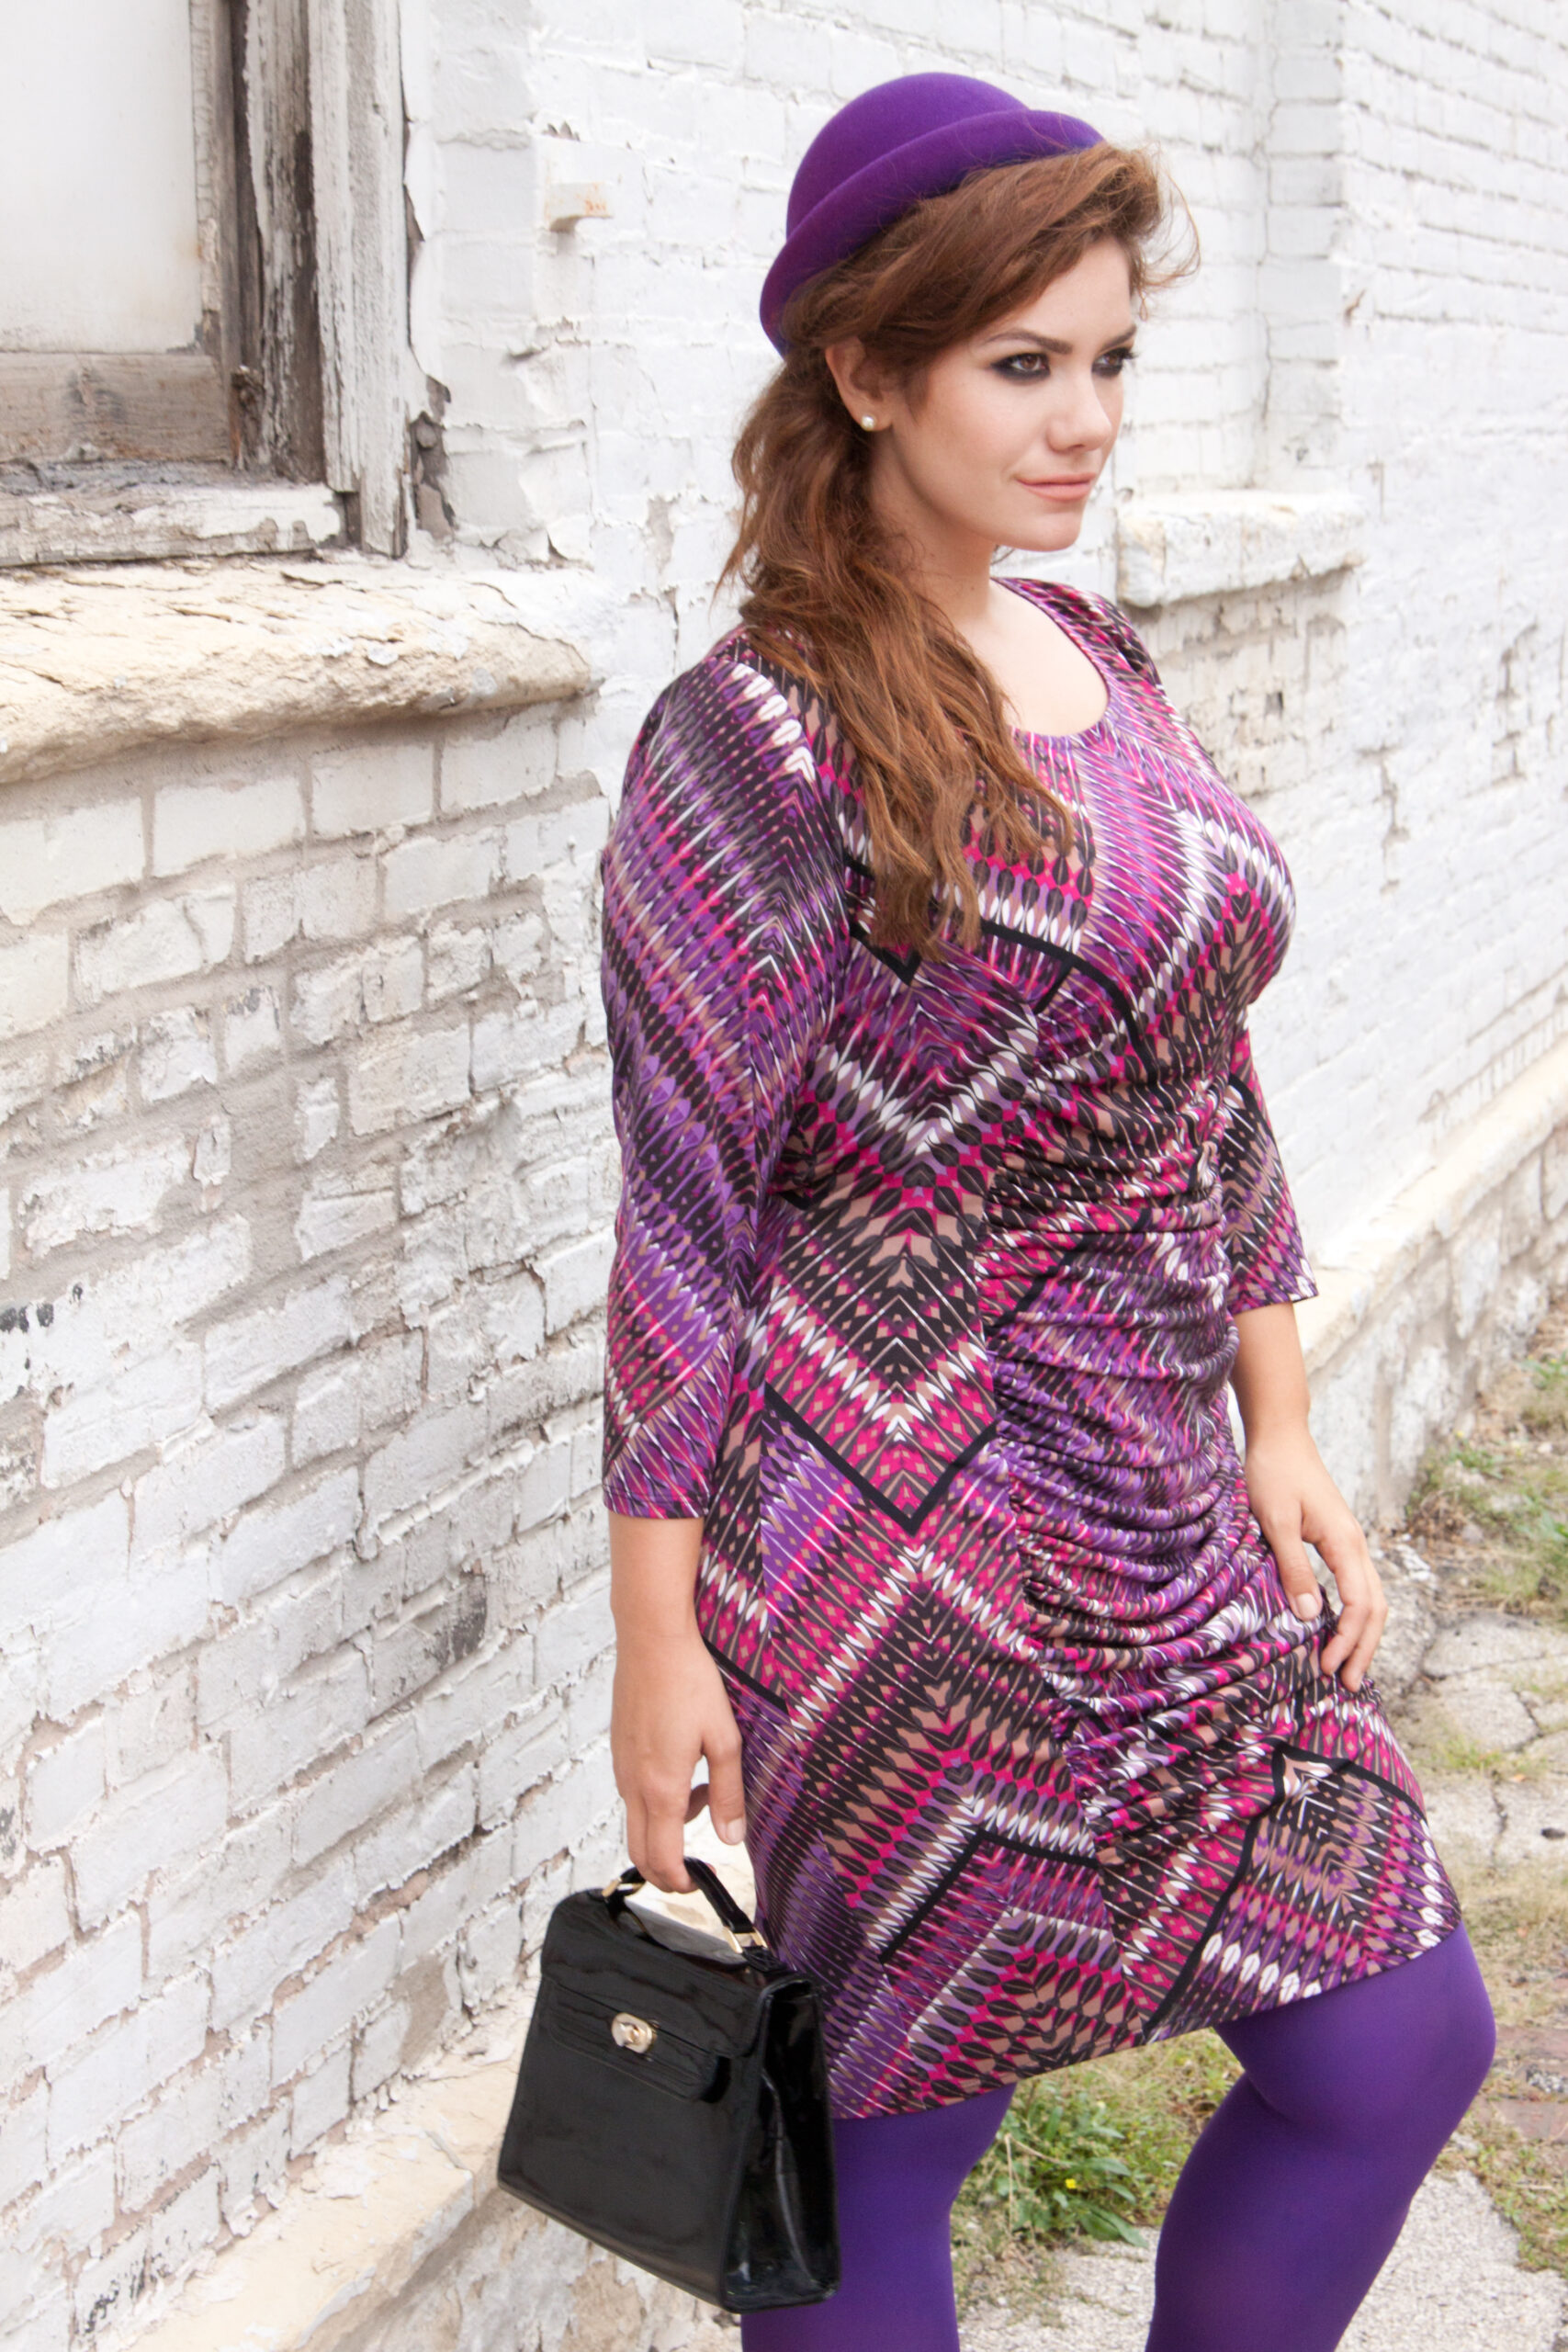 BOUTIQUE LARRIEUX REVAMPS THEIR  WEBSITE WITH MORE PLUS SIZE BRANDS